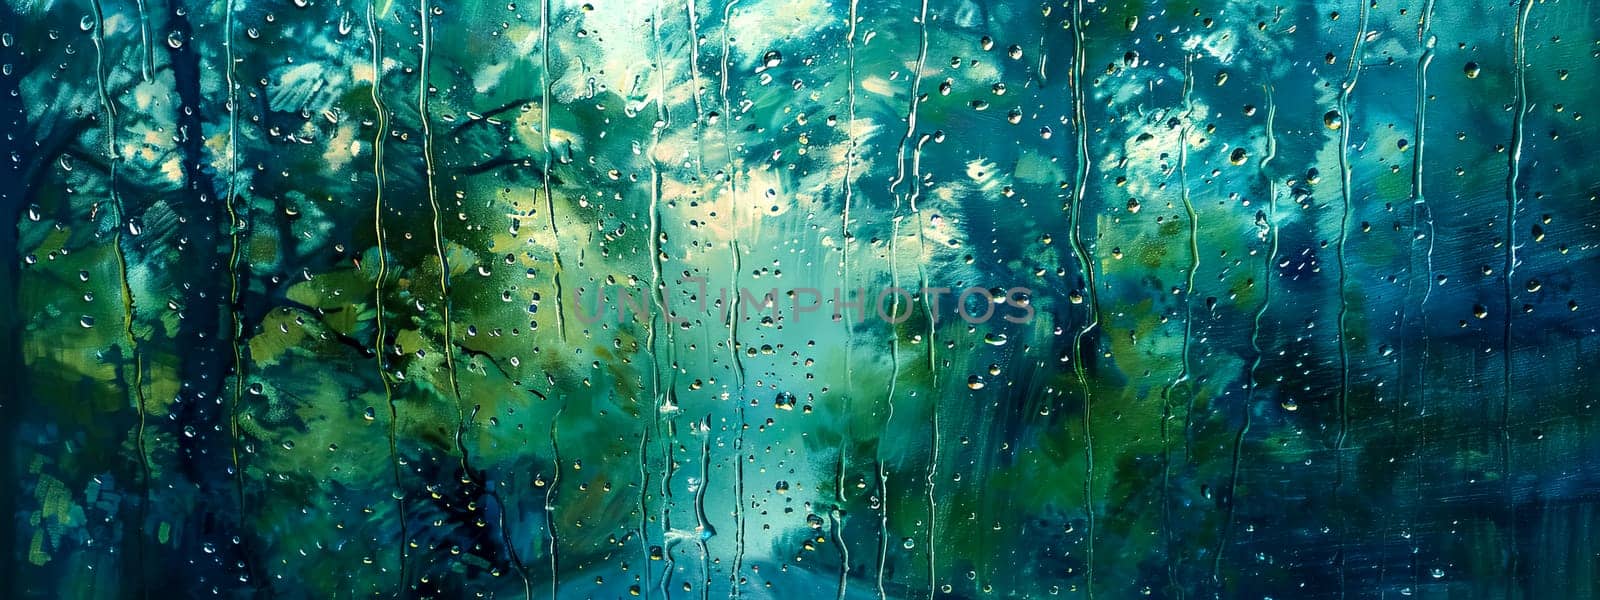 Raindrops on window with forest view by Edophoto